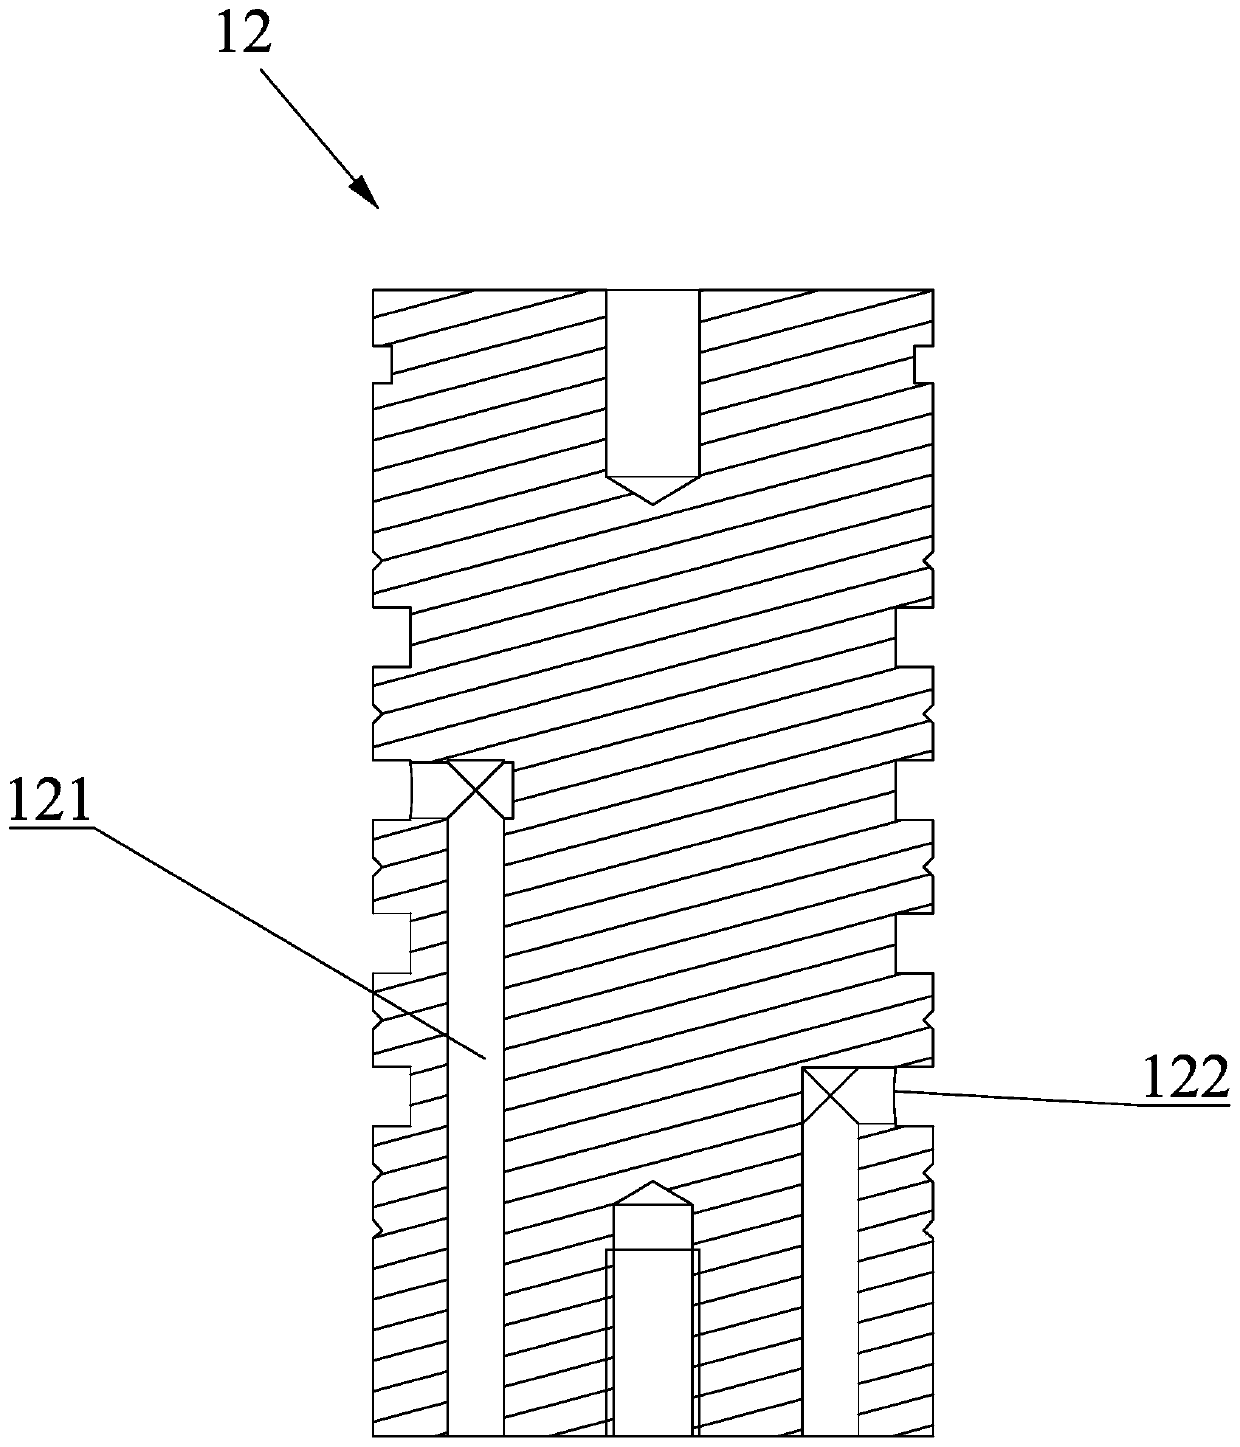 A multi-nozzle nozzle droplet spraying device